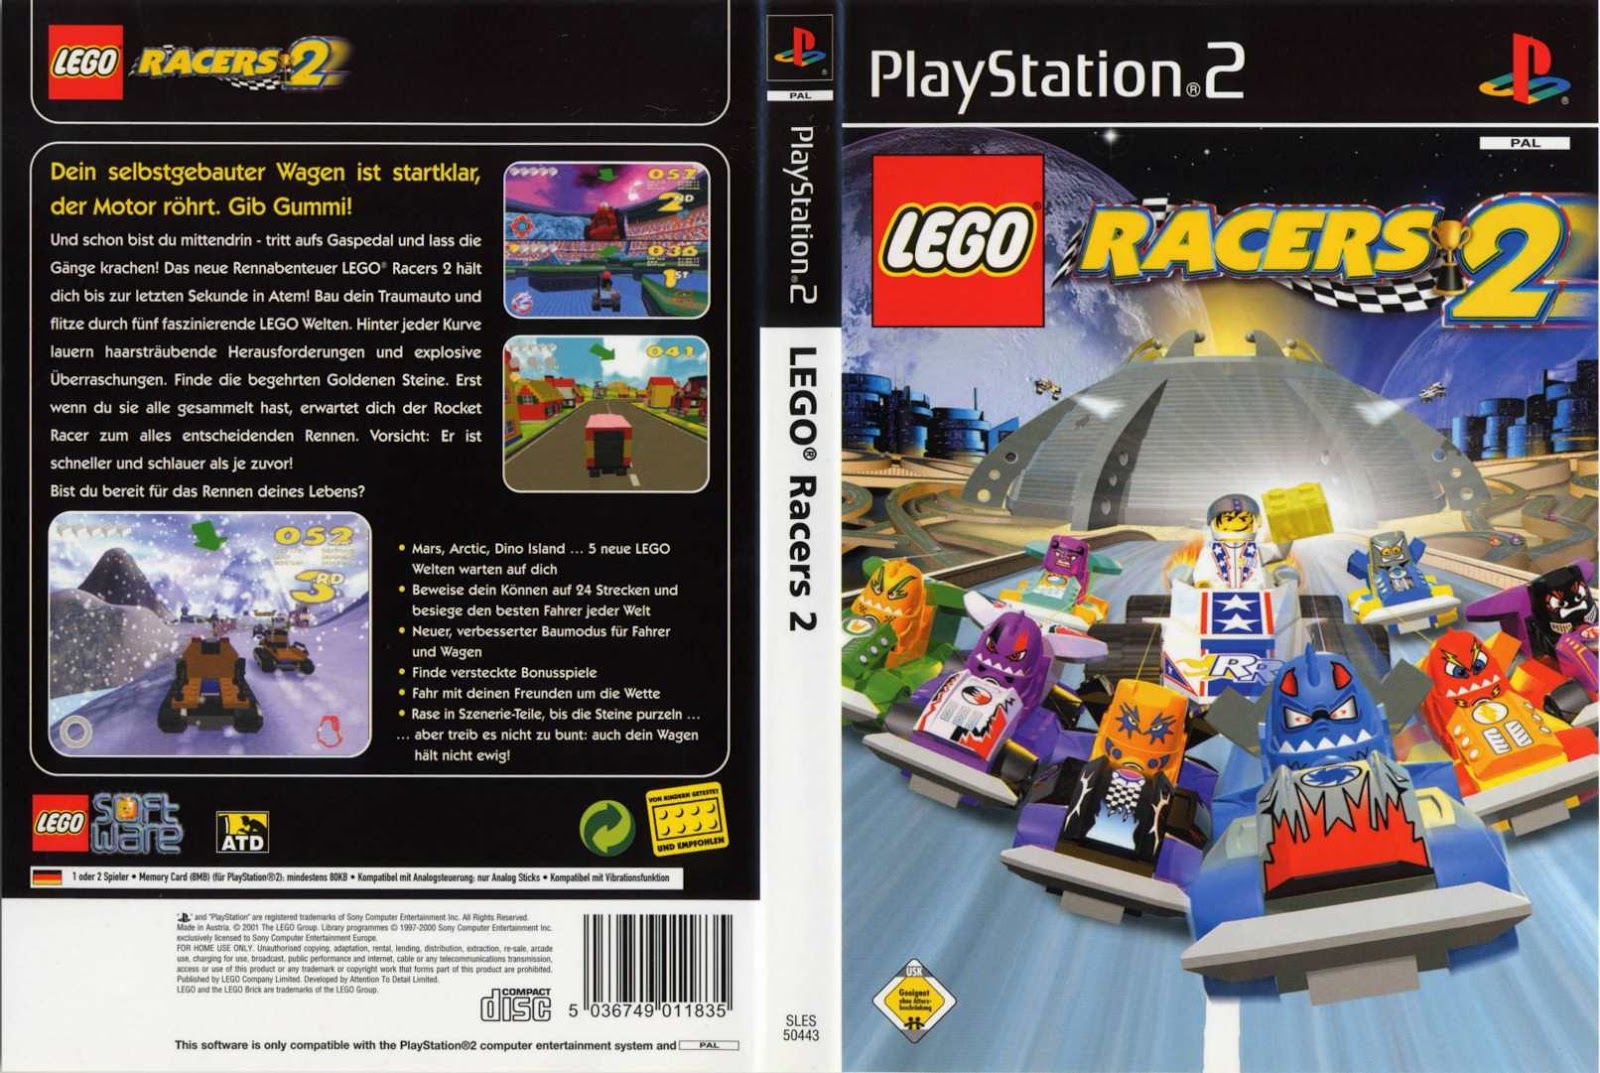 Download Game Lego Racers 2 PS2 Full Version Iso For PC ...